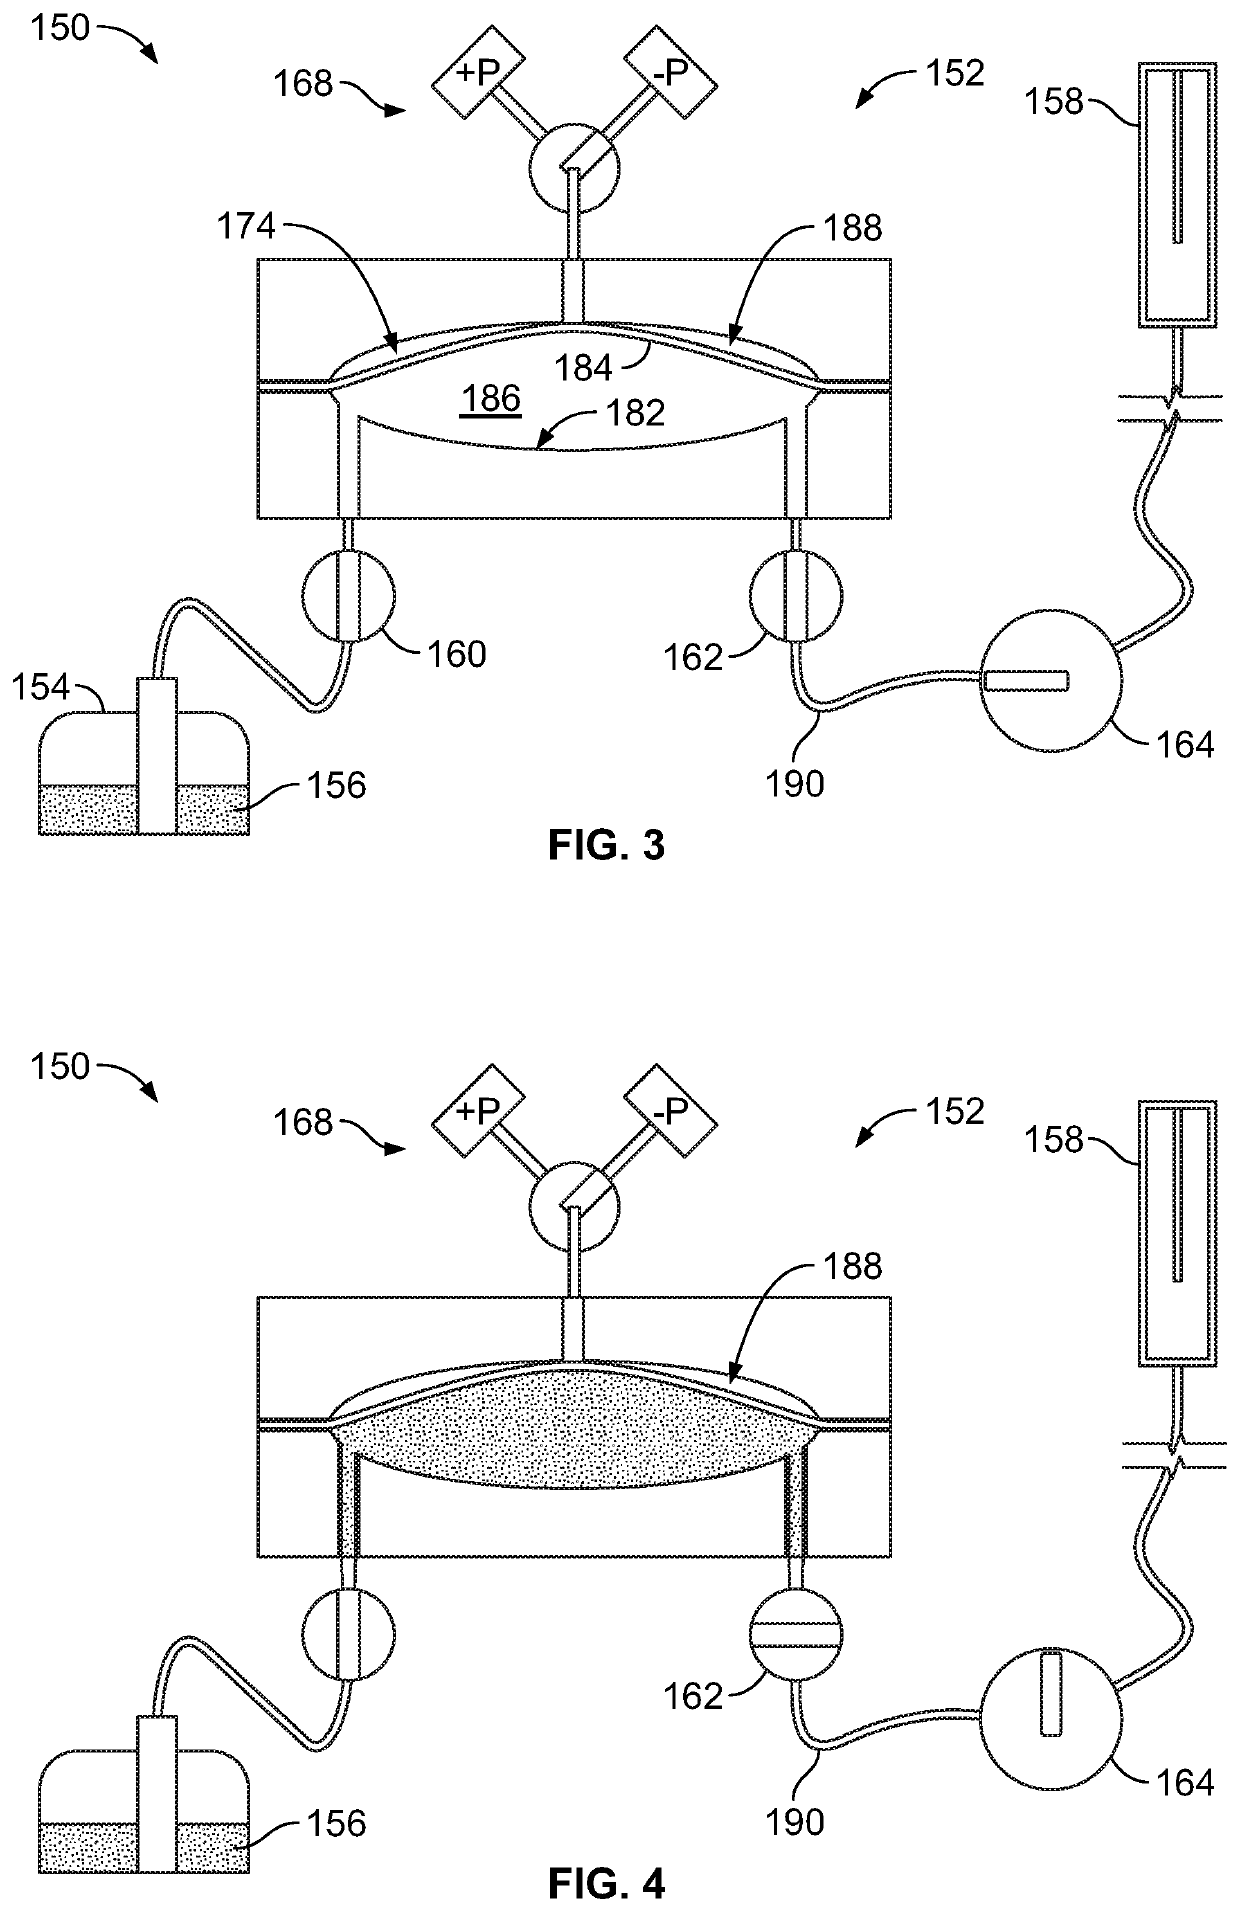 In-line pressure accumulator and flow-control system for biological or chemical assays